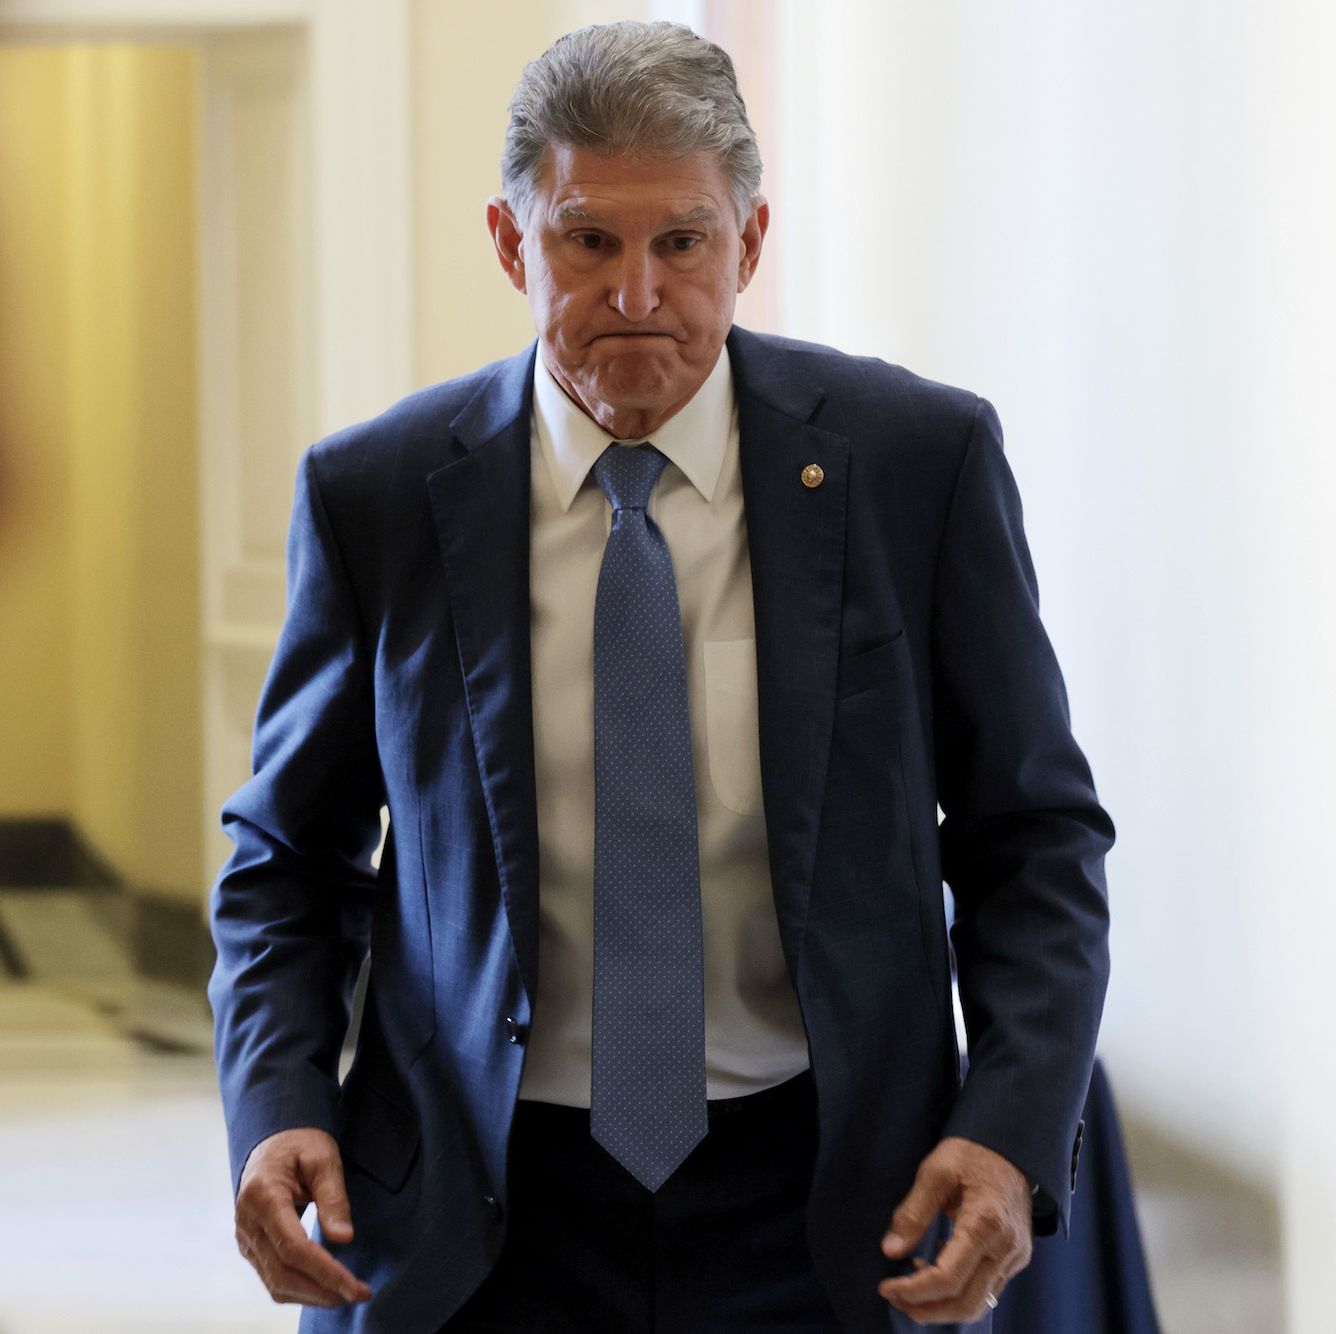 The New York Times Shows How to Hold Joe Manchin Accountable for His Obstructionism